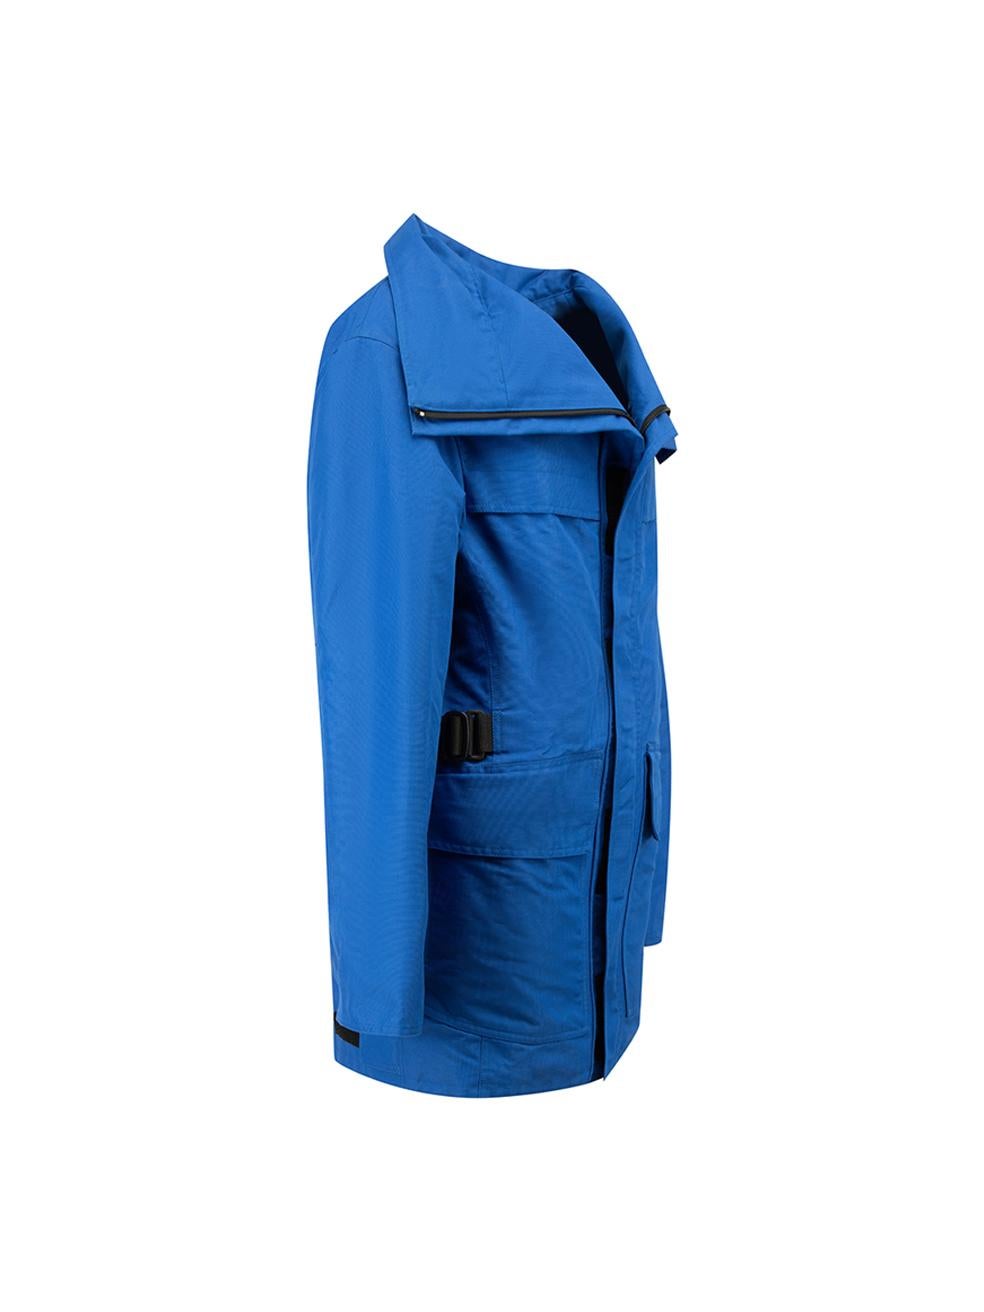 CONDITION is Very good. Hardly any visible wear to coat is evident on this used Balenciaga designer resale item.



Details


Unisex

Blue

Synthetics

Parka coat

Mid length

Zip and velcro fastening

Adjustable side belts

2x Front patch pockets